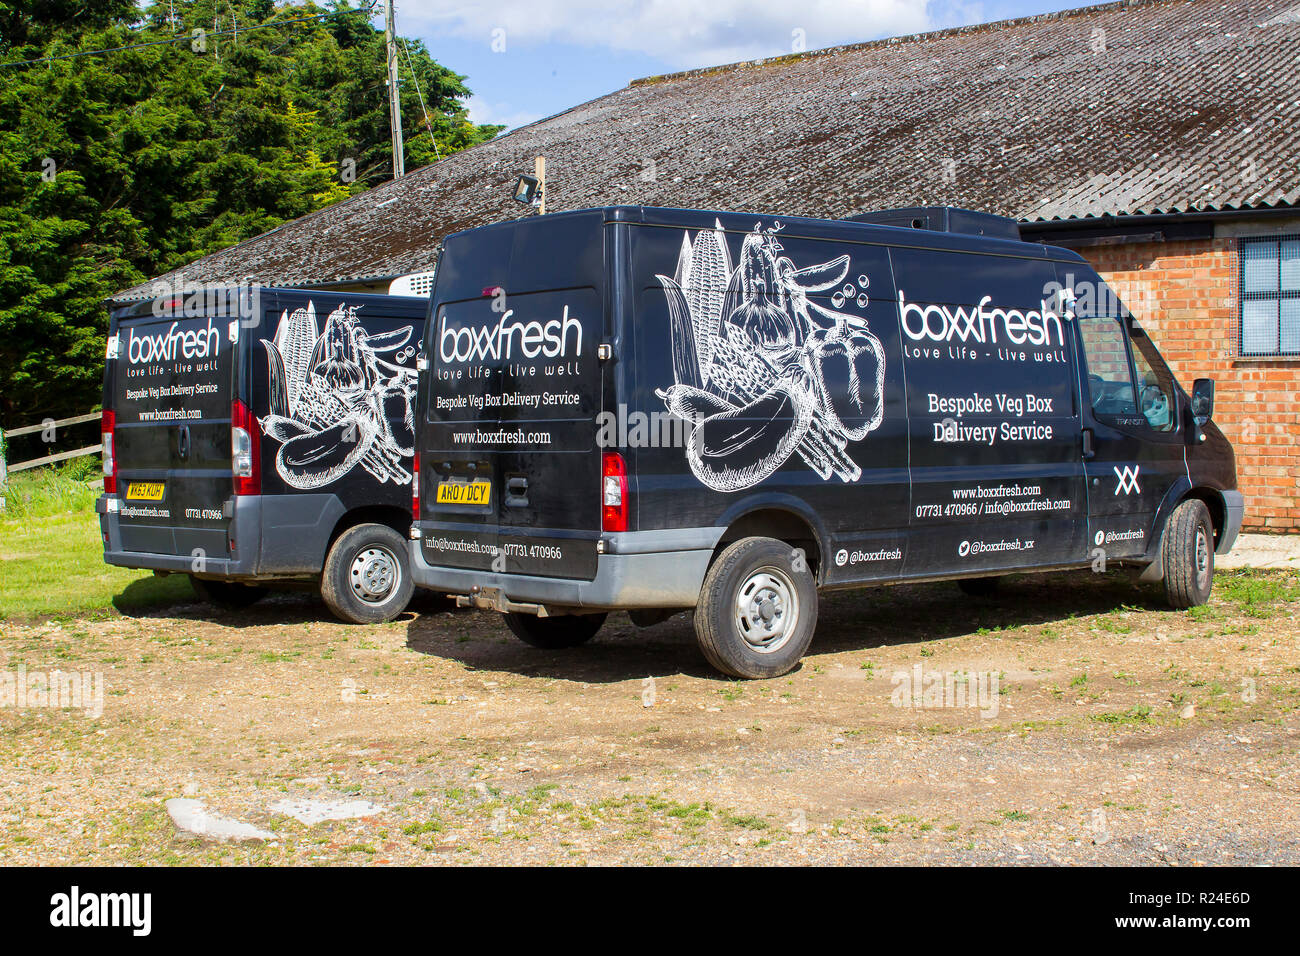 10 June 2017 A pair of Ford transit delivery vans in a small business boxxfresh livery. this company specialises in the supply and delivery of boxed f Stock Photo